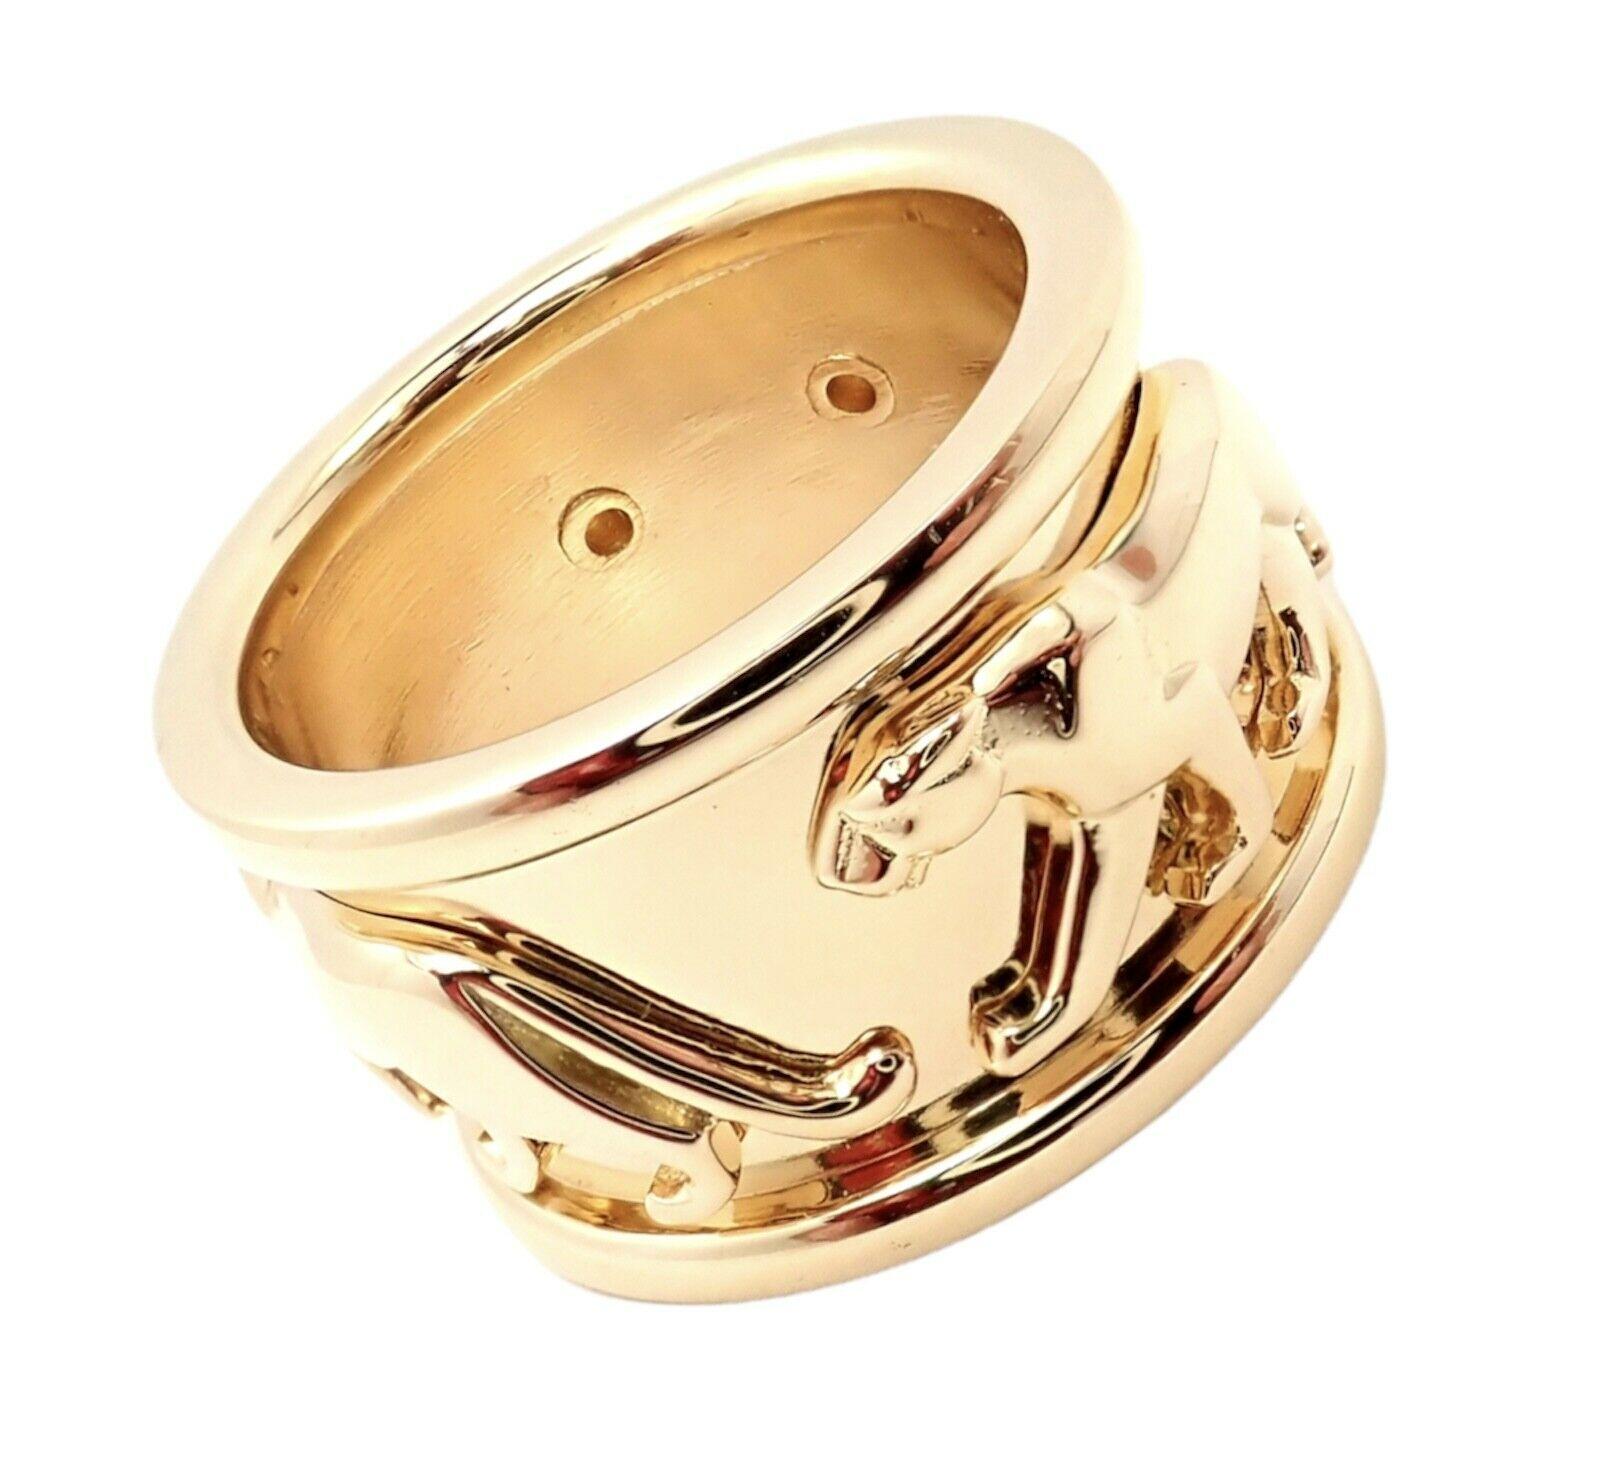 18k Yellow Gold Walking Panther Ring by Cartier. Part of Cartier's Panthere Collection. 
Details: 
Ring Size: European 50, US 5.25
Width: 12mm
Weight: 12 grams
Stamped Hallmarks: Cartier 750 50 (serial number omitted)
Free Shipping within the United